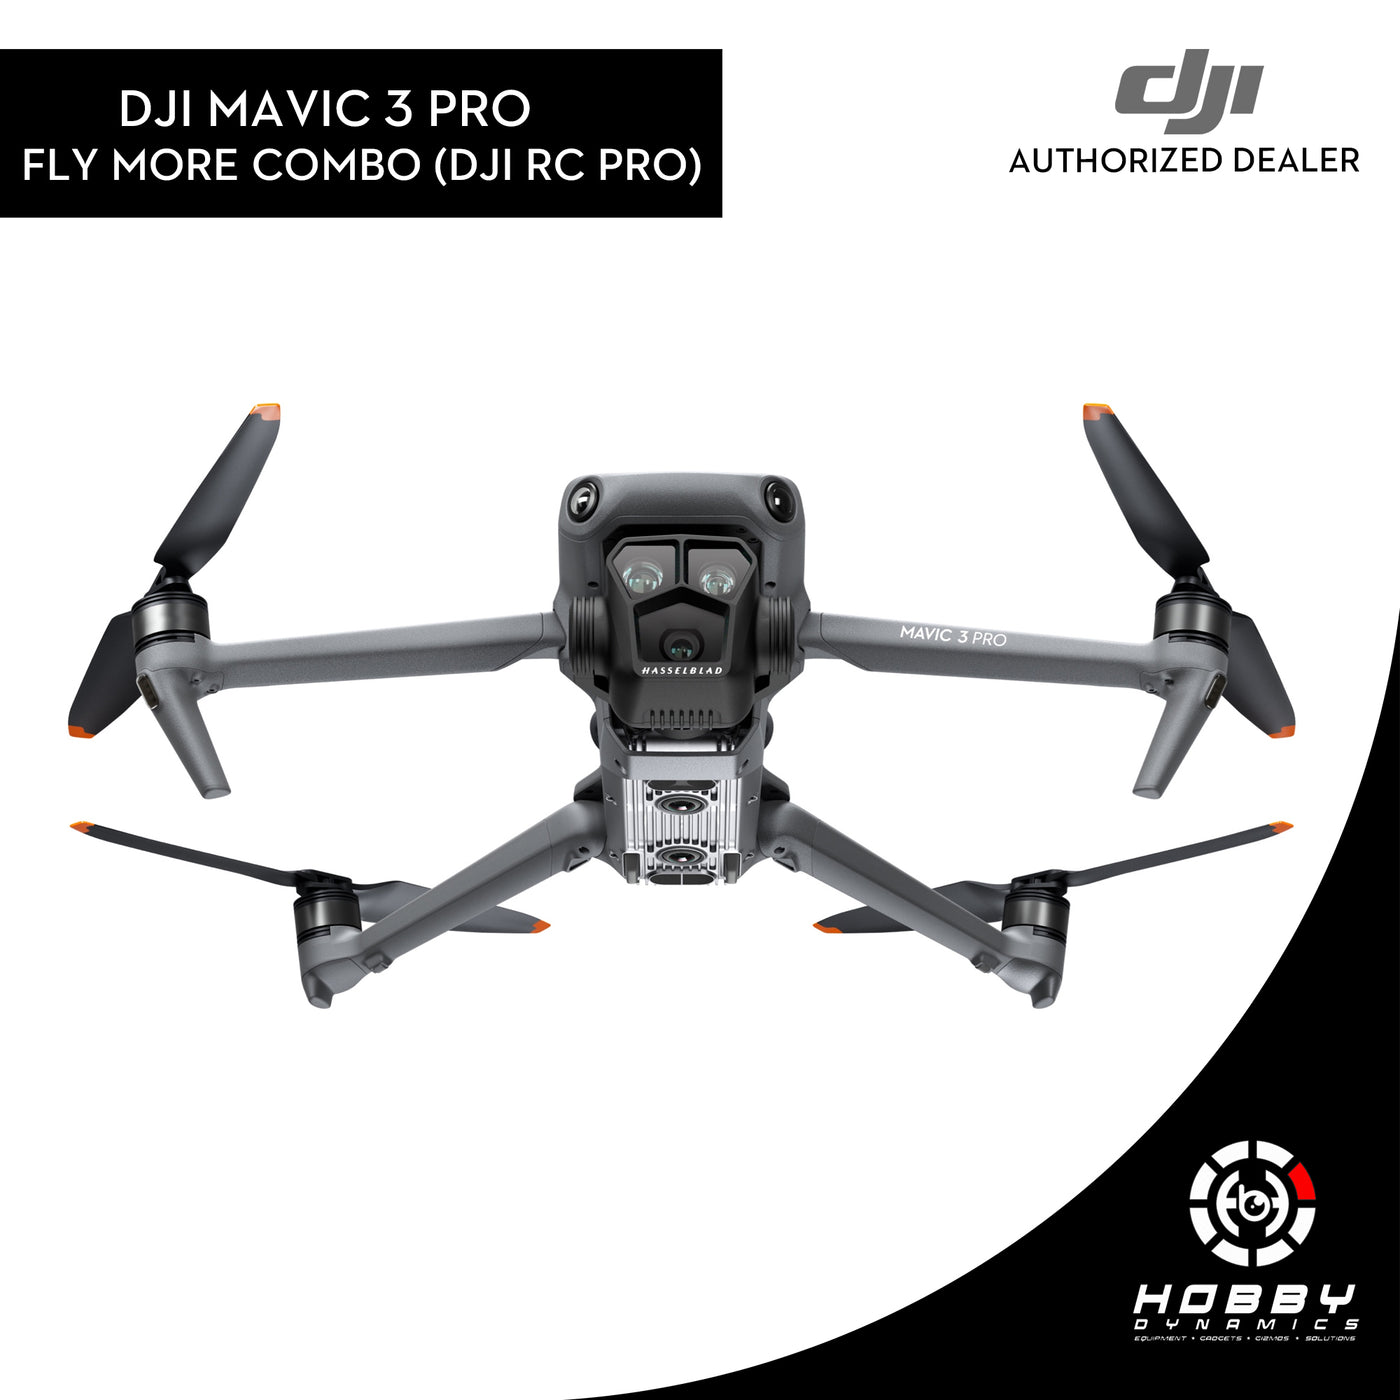 DJI Mavic 3 Pro Fly More Combo (DJI RC Pro) with FREE Sandisk Extreme 64GB SD Card